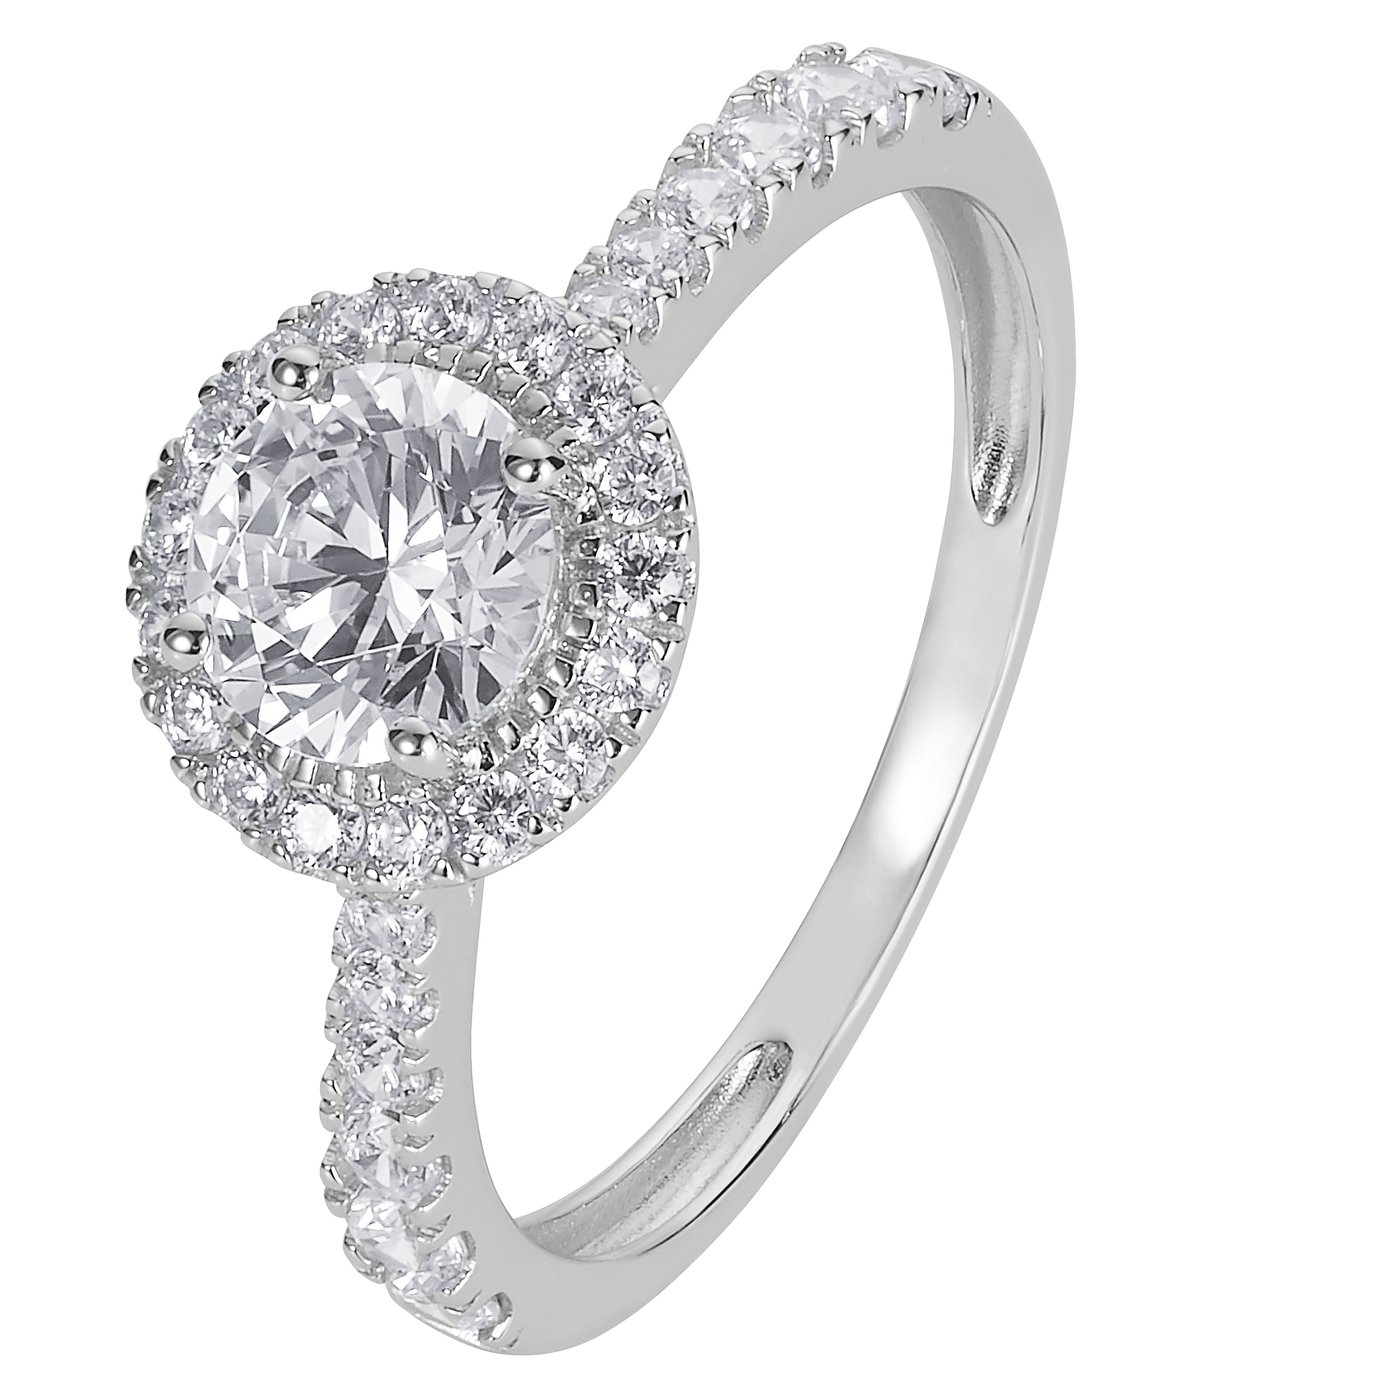 Revere 9ct White Gold Cubic Zirconia Halo Engagement Ring J